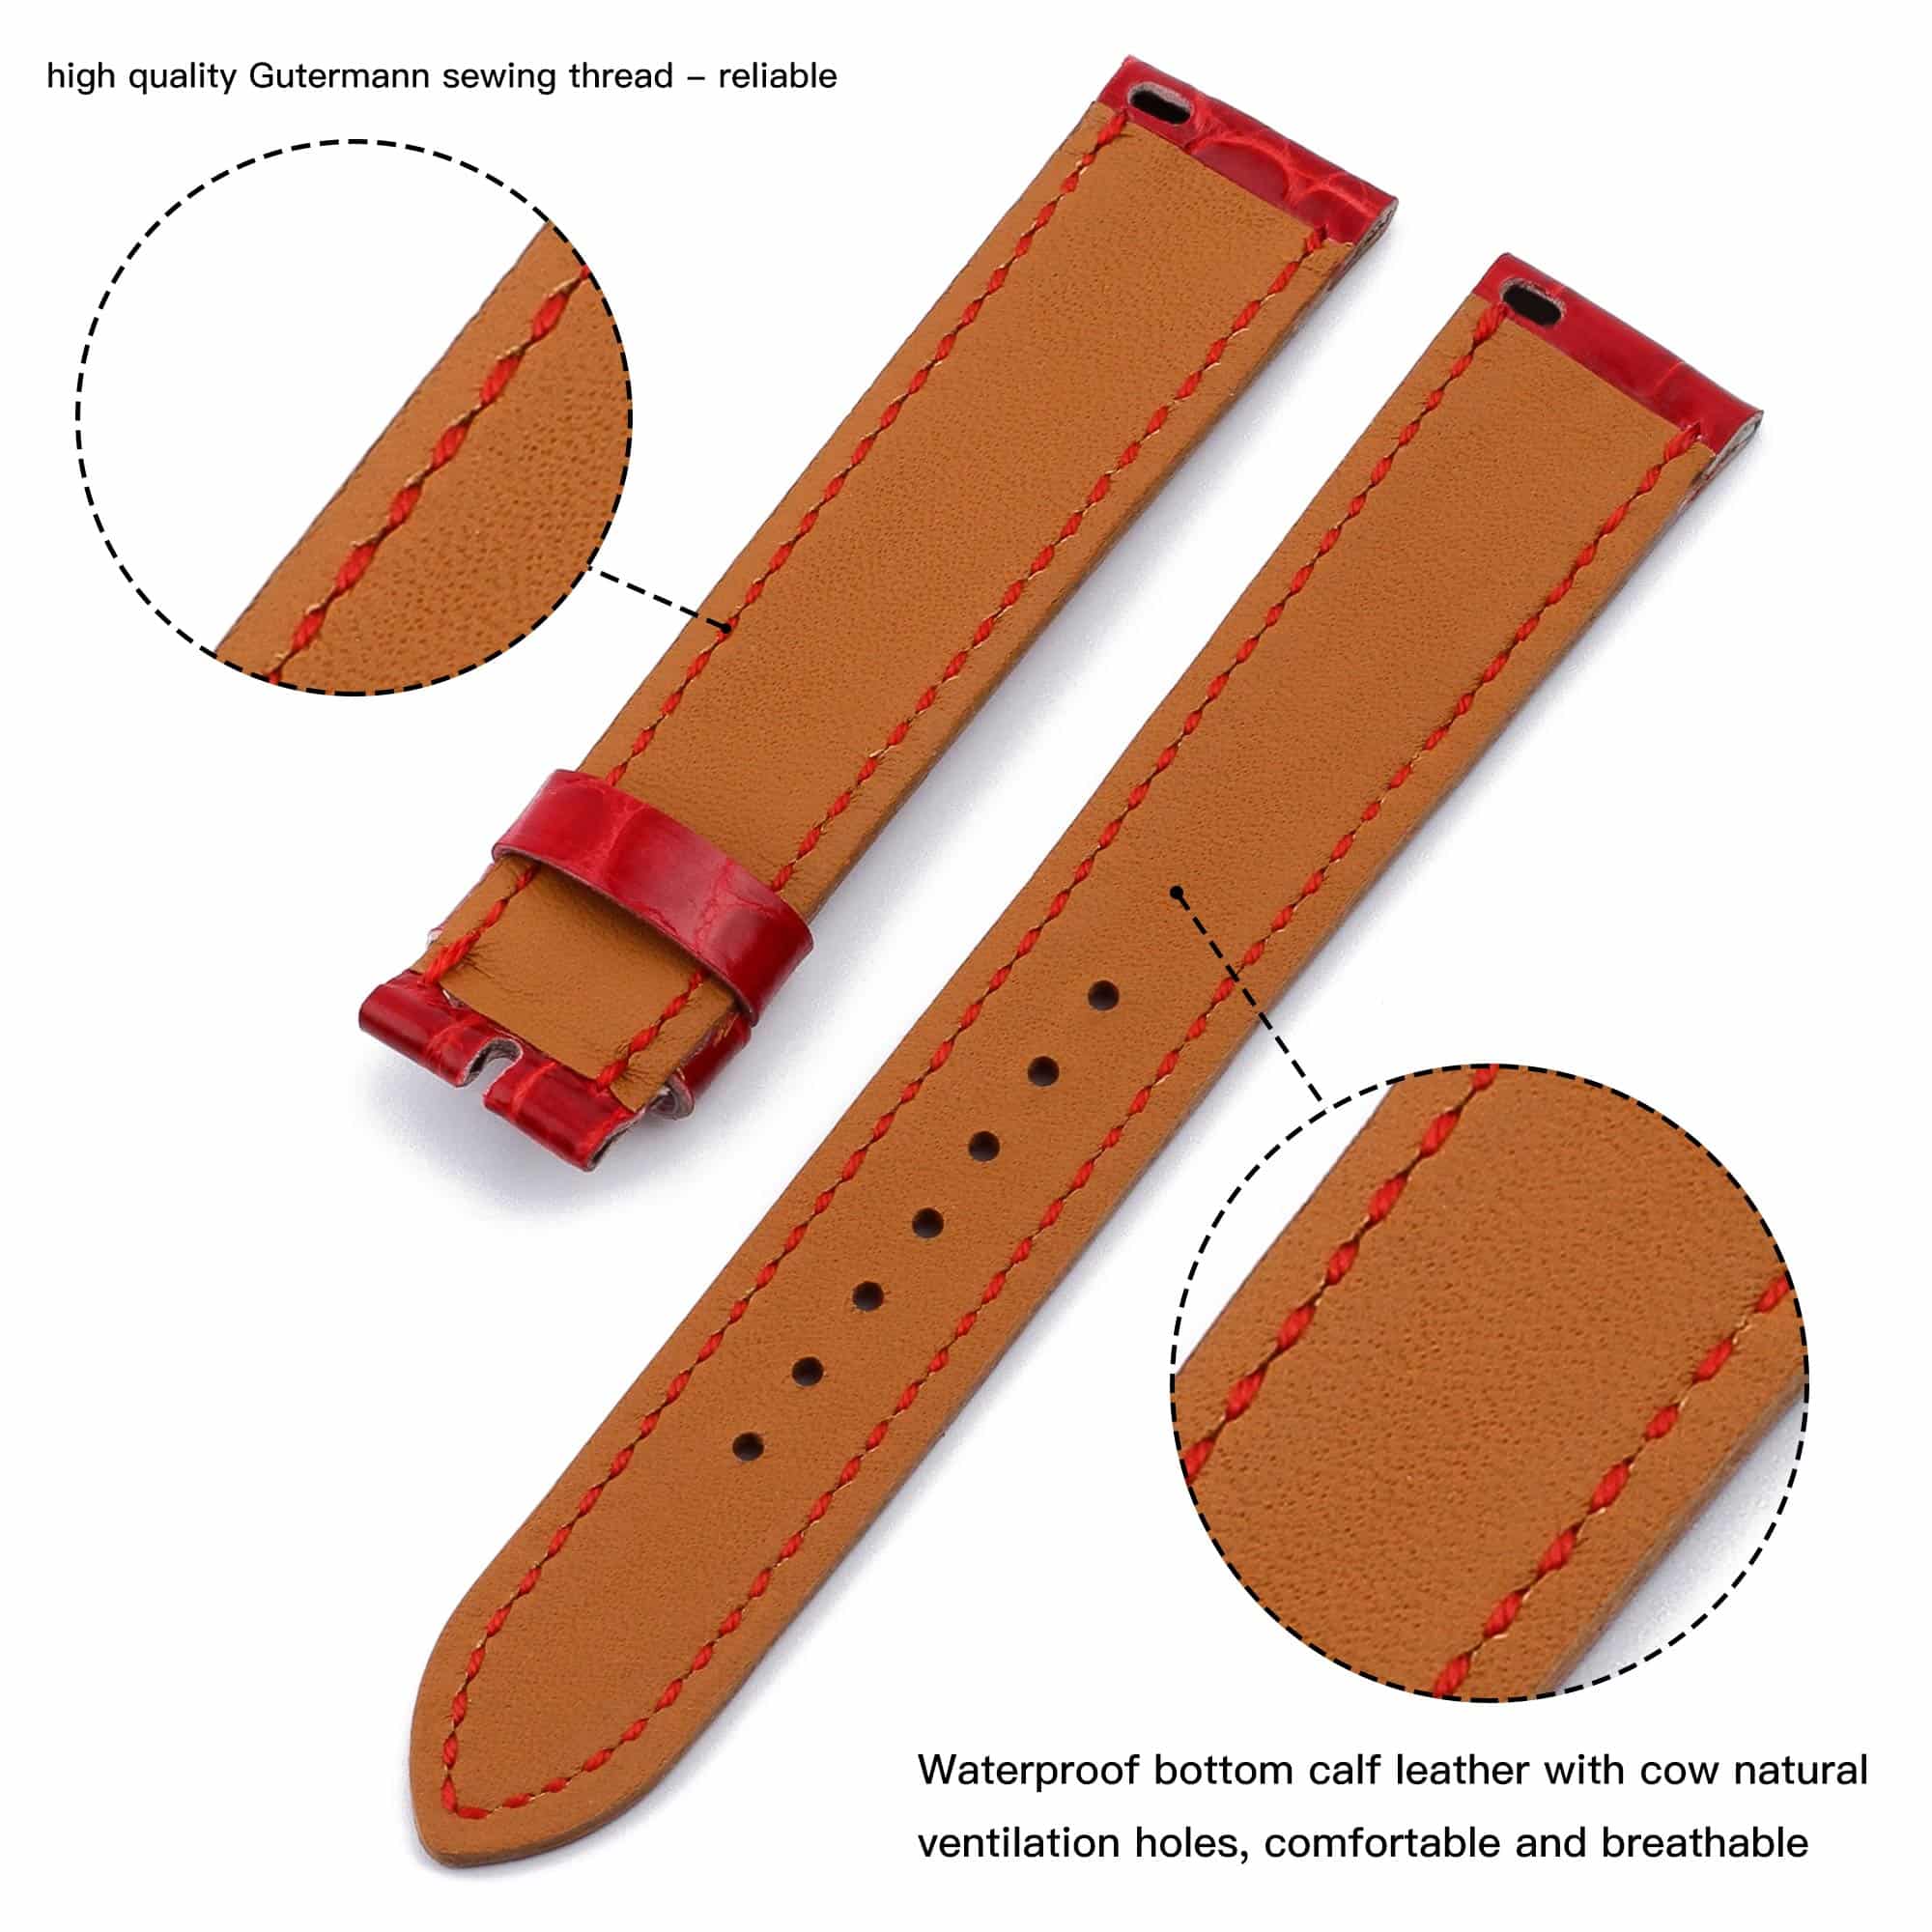 Custom alligator Hermes watch band replacement single tour leather strap compatible for Hermes Heure H and Hermes Cape Cod Arceau luxury watches red watch band online at a discount price